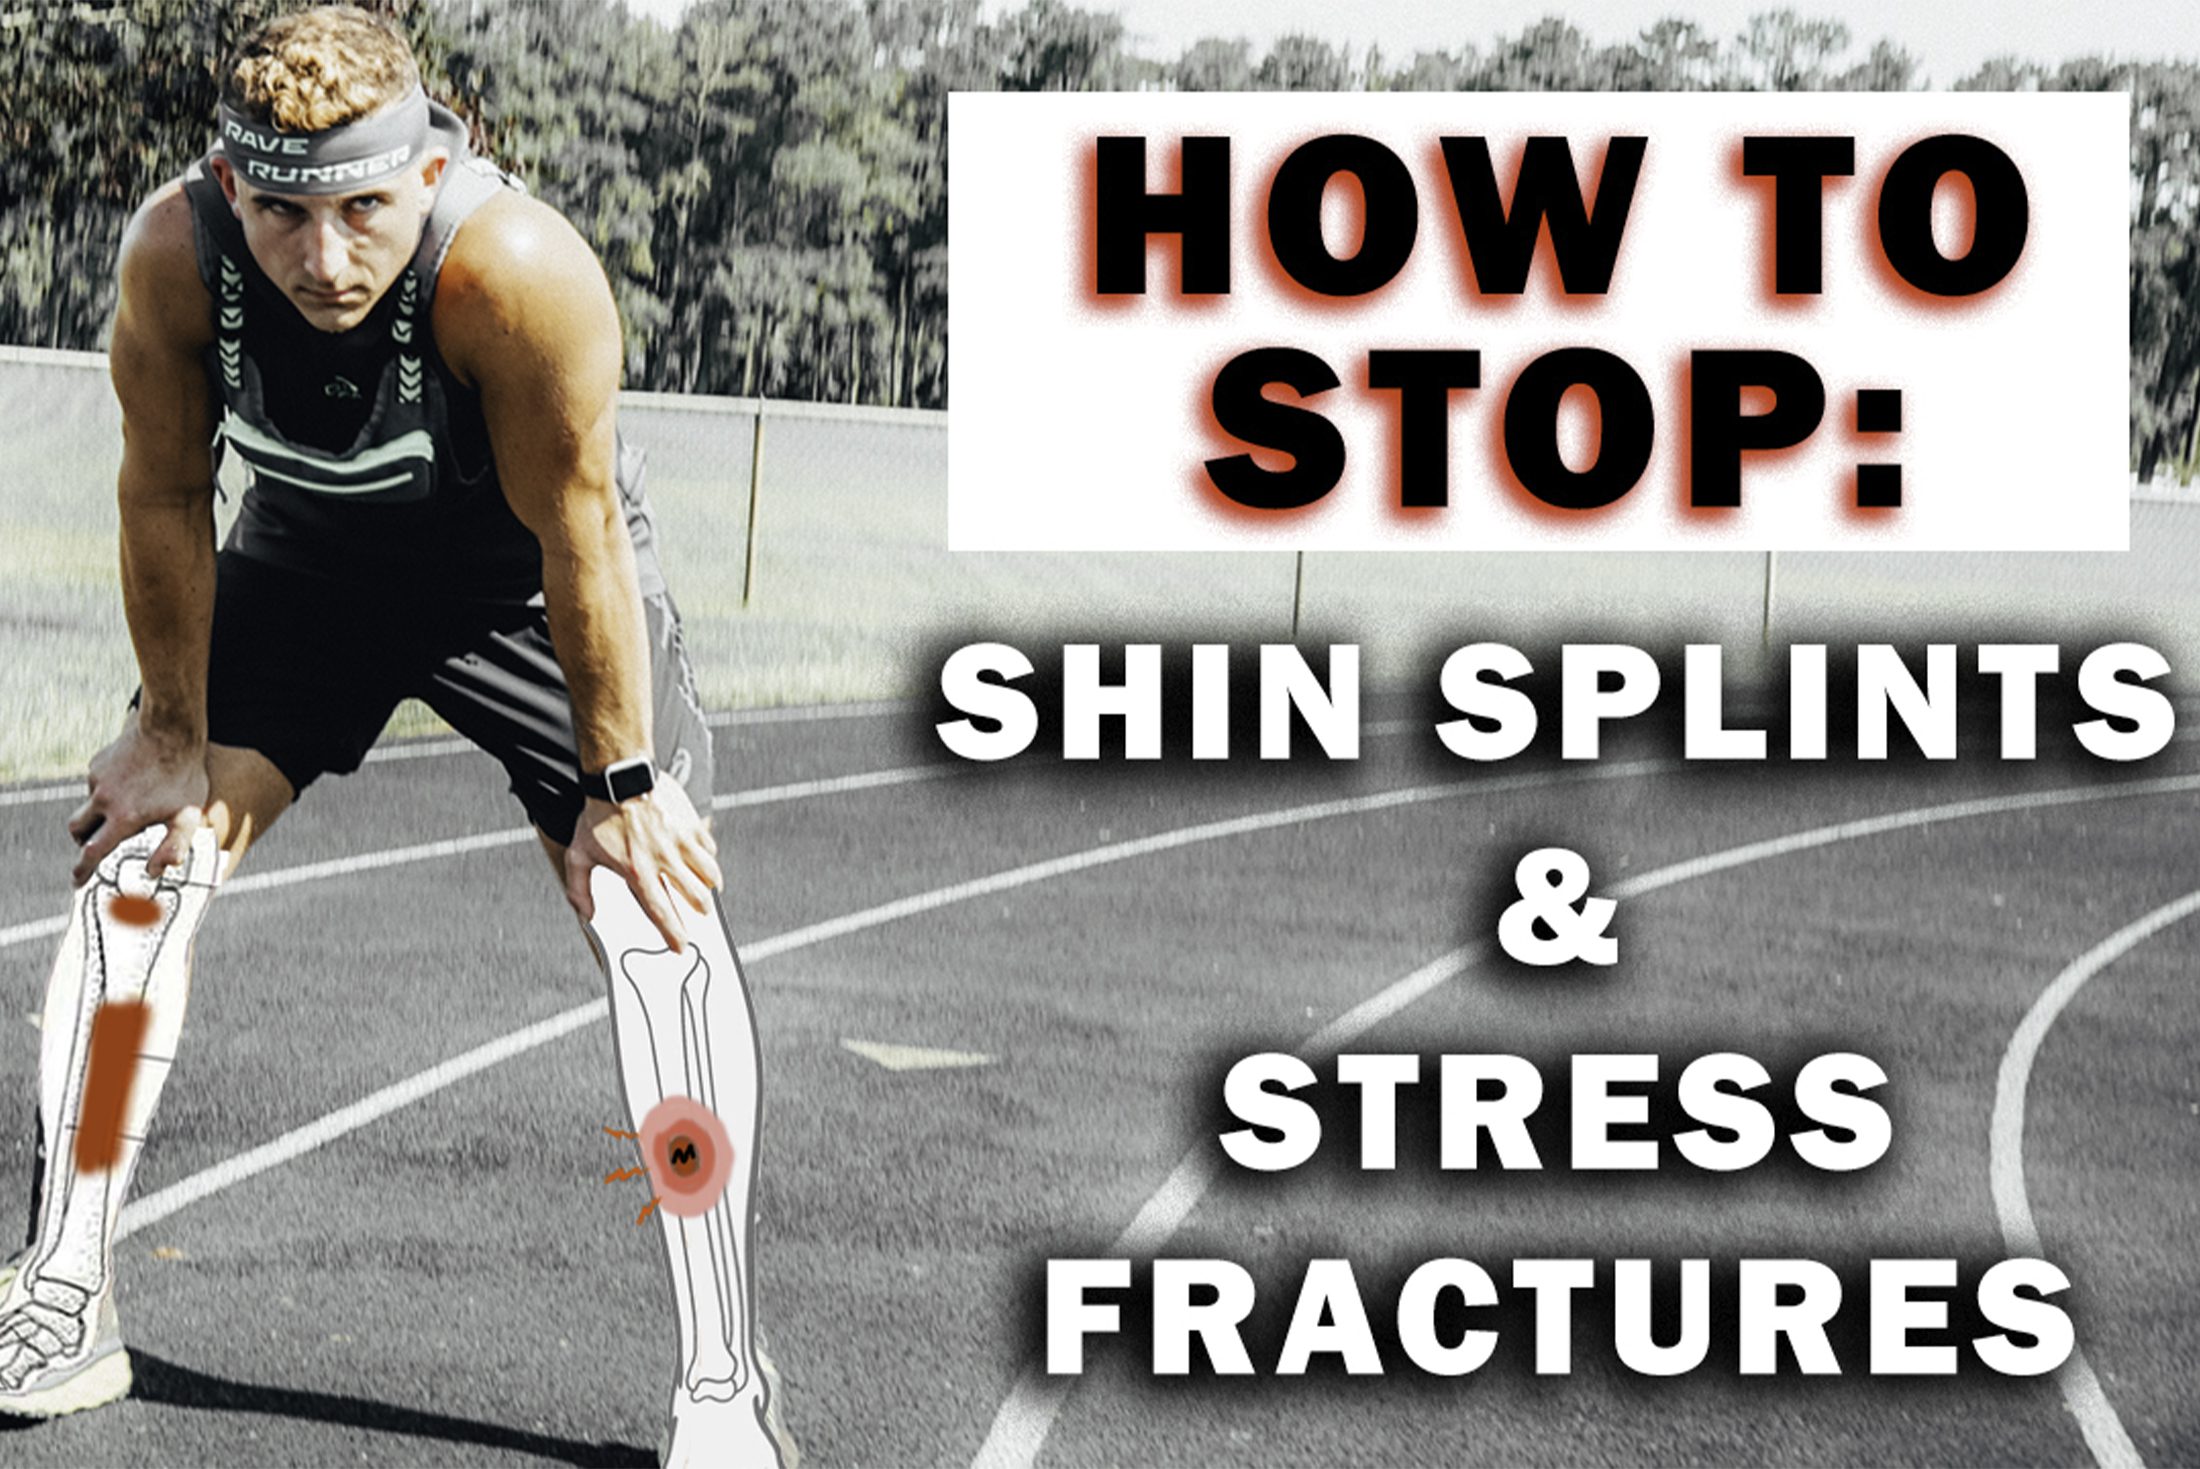 how to prevent shin splints and stress fractures